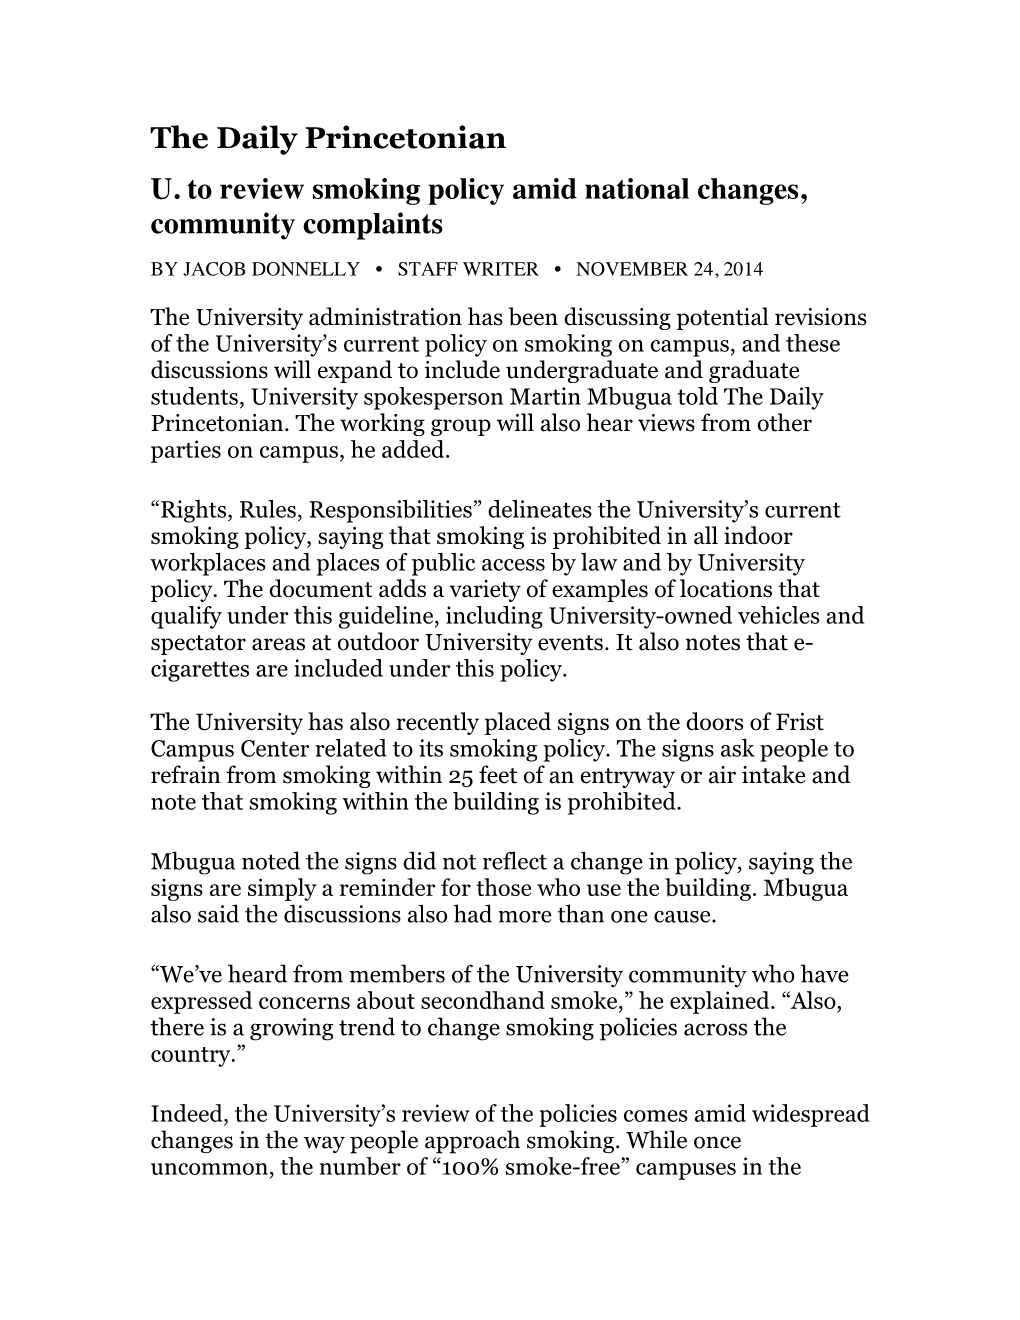 The Daily Princetonian U. to Review Smoking Policy Amid National Changes, Community Complaints by JACOB DONNELLY • STAFF WRITER • NOVEMBER 24, 2014